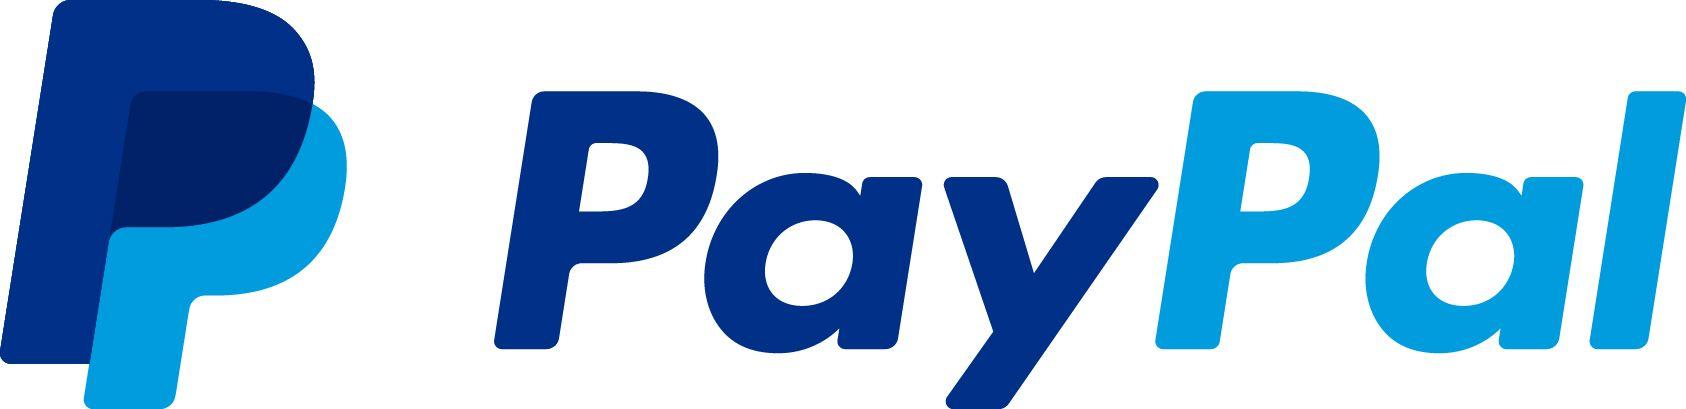 PayPal Payment Logo - Media Resources - PayPal Stories